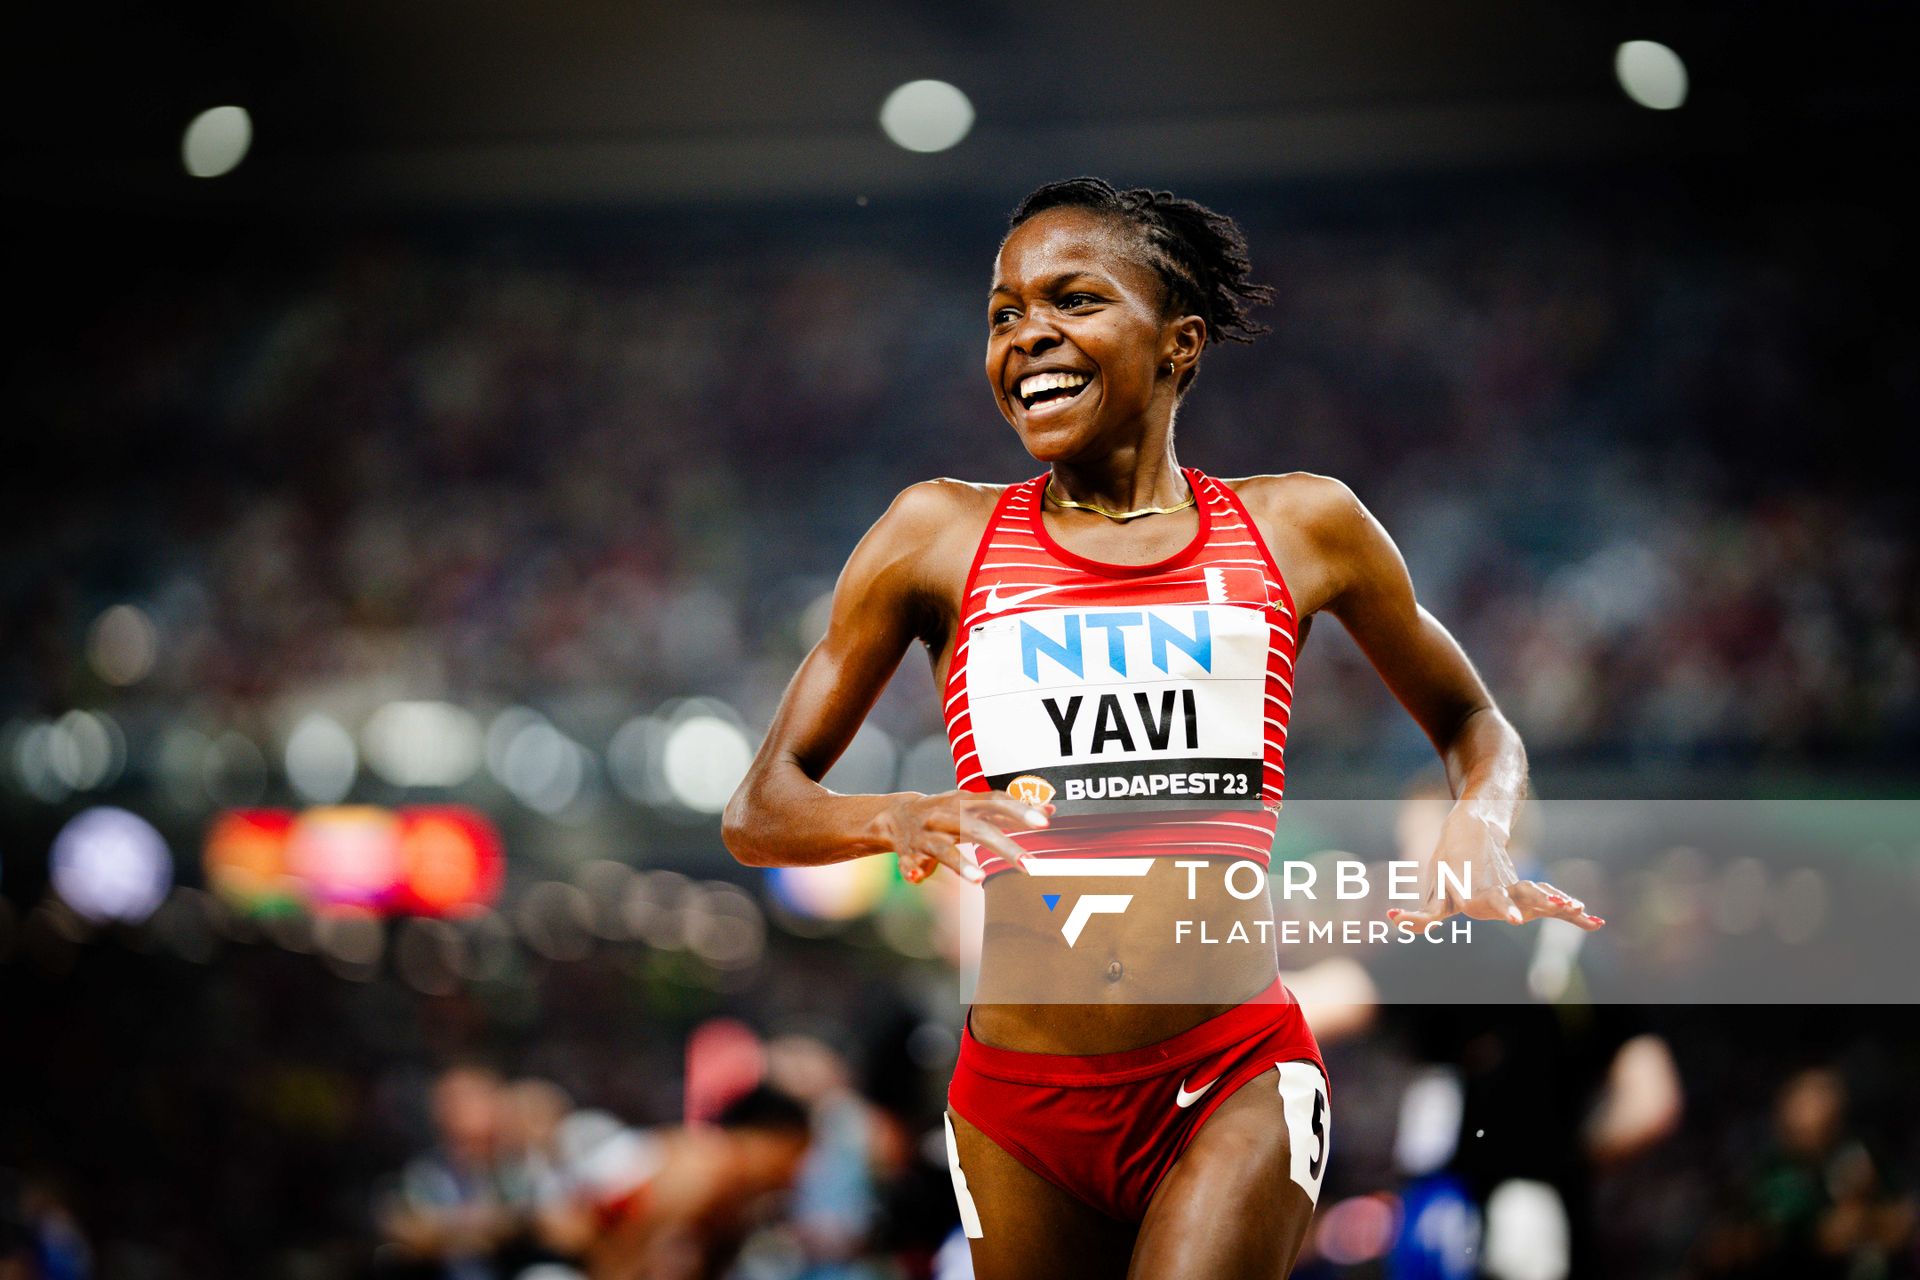 Winfred Mutile Yavi (BRN/Bahrain) during the 3000 Metres Steeplechase Final on Day 9 of the World Athletics Championships Budapest 23 at the National Athletics Centre in Budapest, Hungary on August 27, 2023.